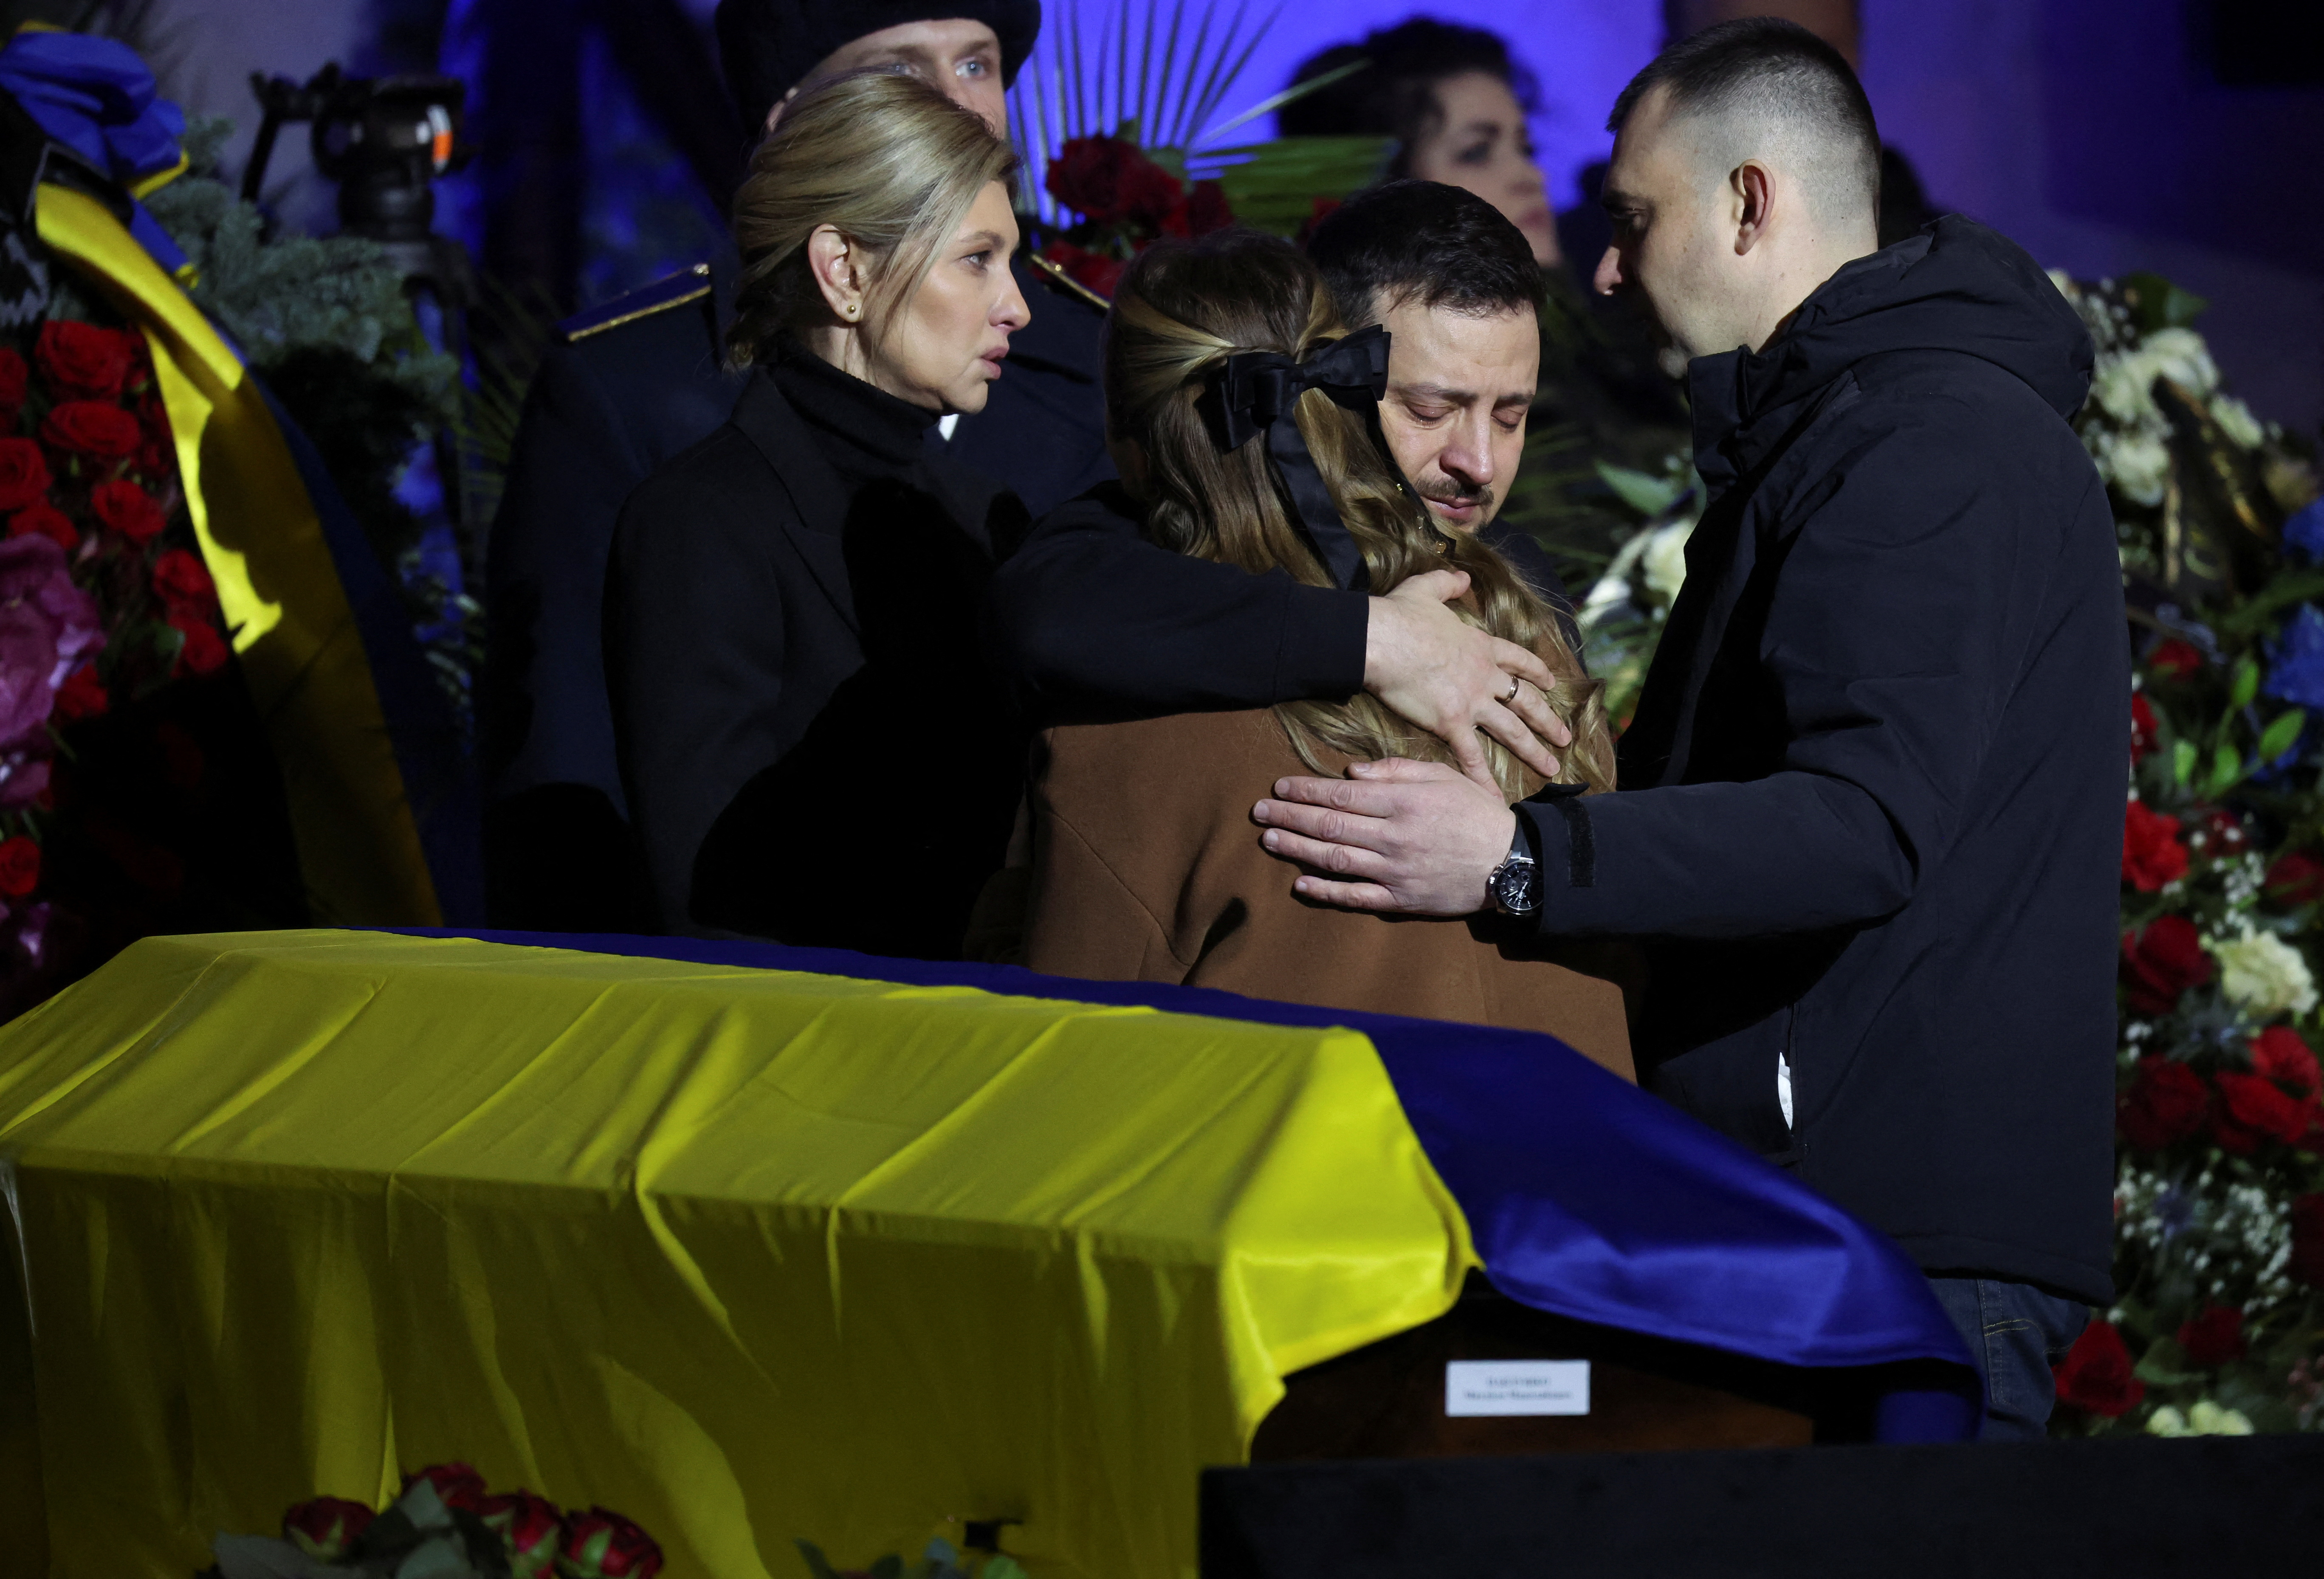 Ukraine's President Volodimir Zelensky and First Lady Olena Zelenska offer their condolences at a memorial service for Ukrainian Interior Minister Denys Monastyrskyi, his deputy and officials who died in the helicopter crash near kyiv, in kyiv, Ukraine, January 21, 2023. REUTERS/Nacho Doce